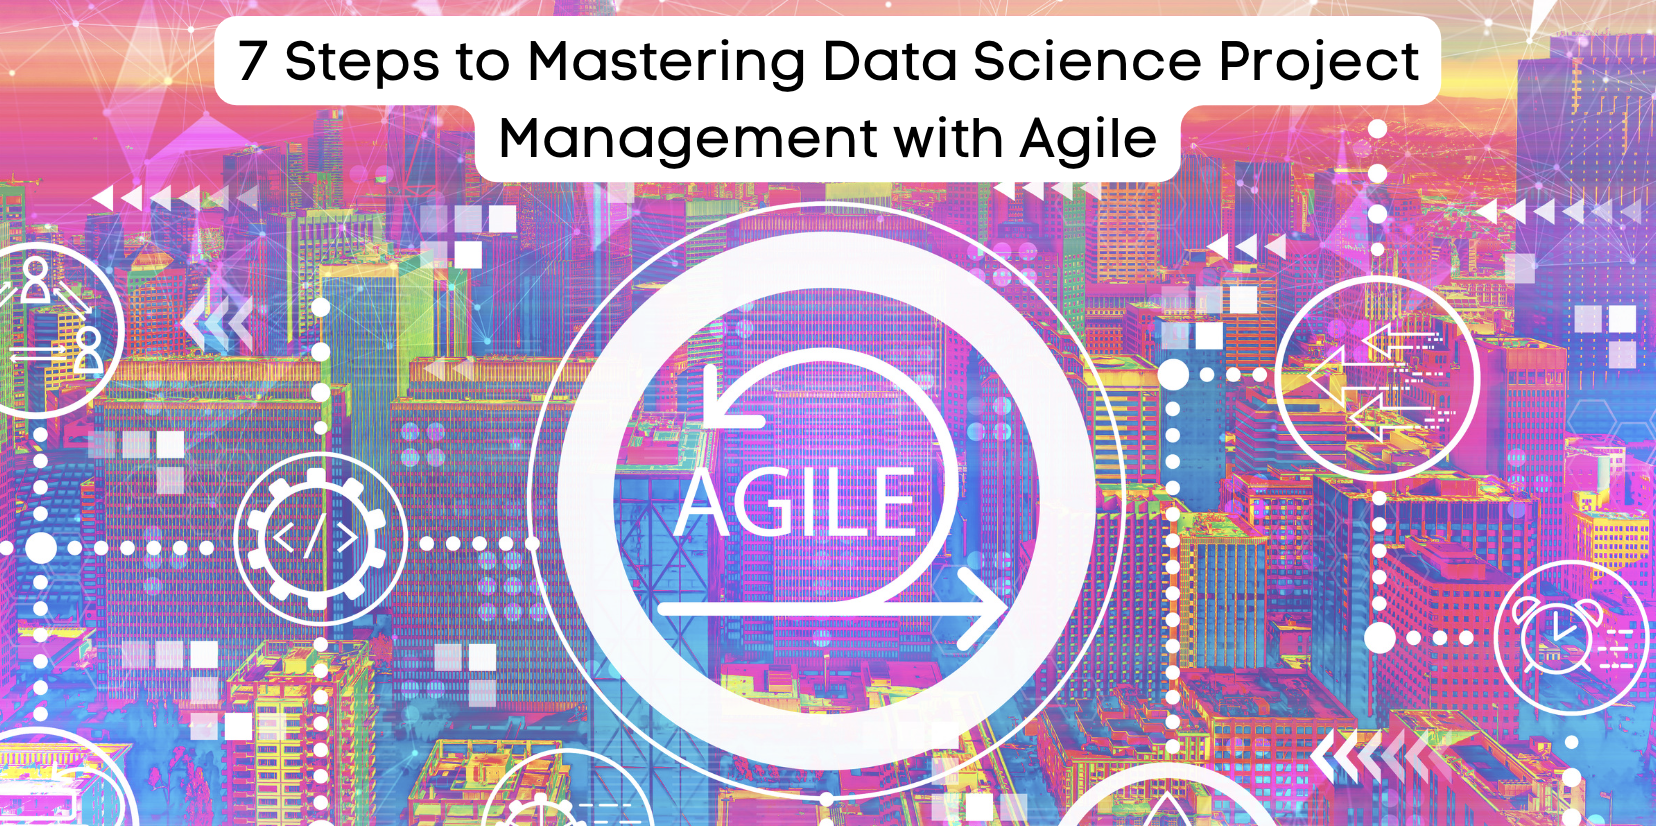 7 Steps to Master Agile Data Science Project Management